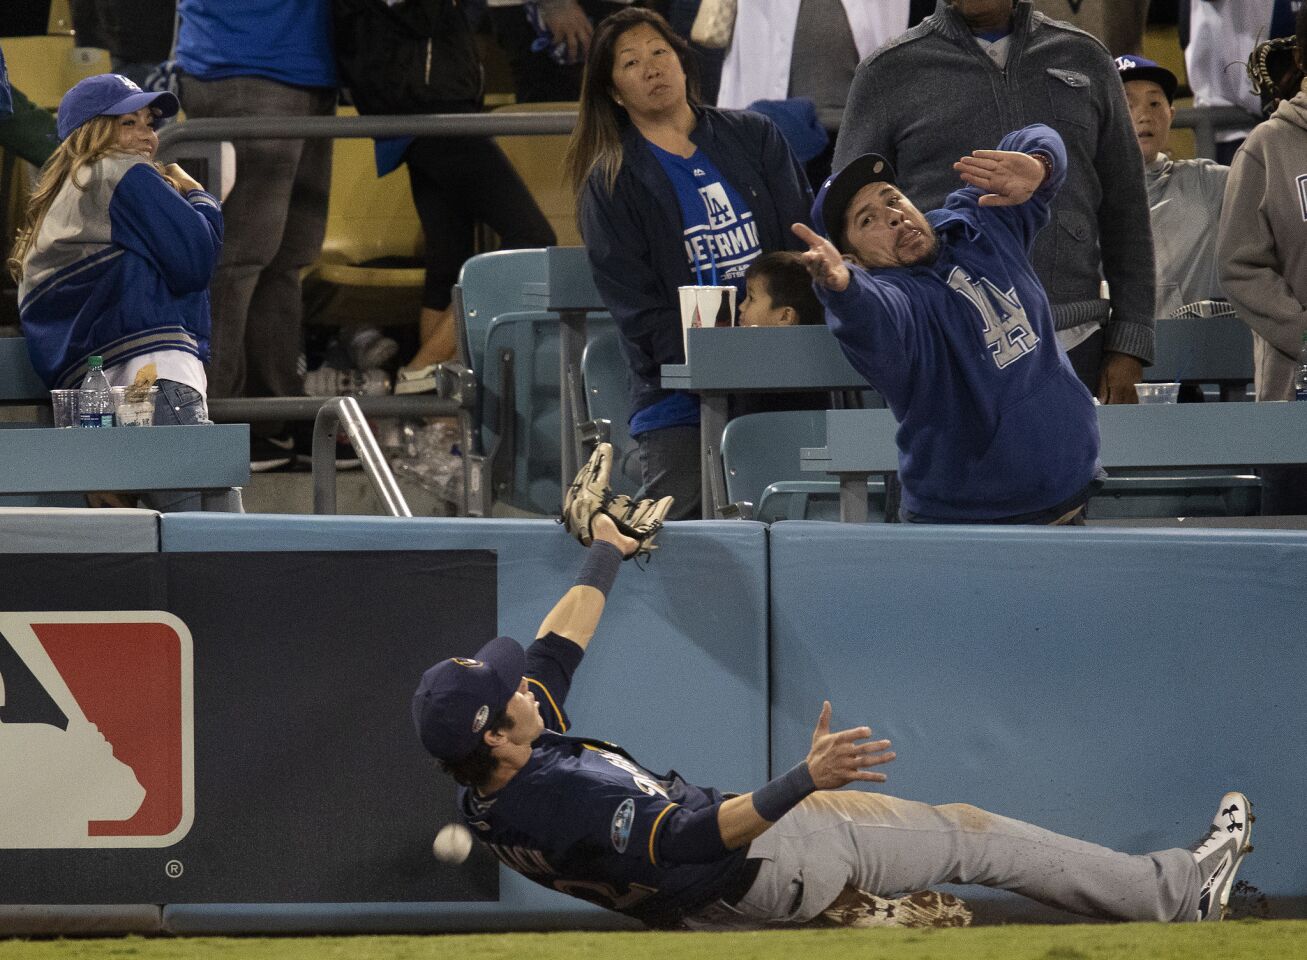 A fan almost interferes as Milwaukee Brewers right fielder Christian Yelich (22) tries to catch a foul ball hit by Dodgers Brian Dozier in the eighth inning.